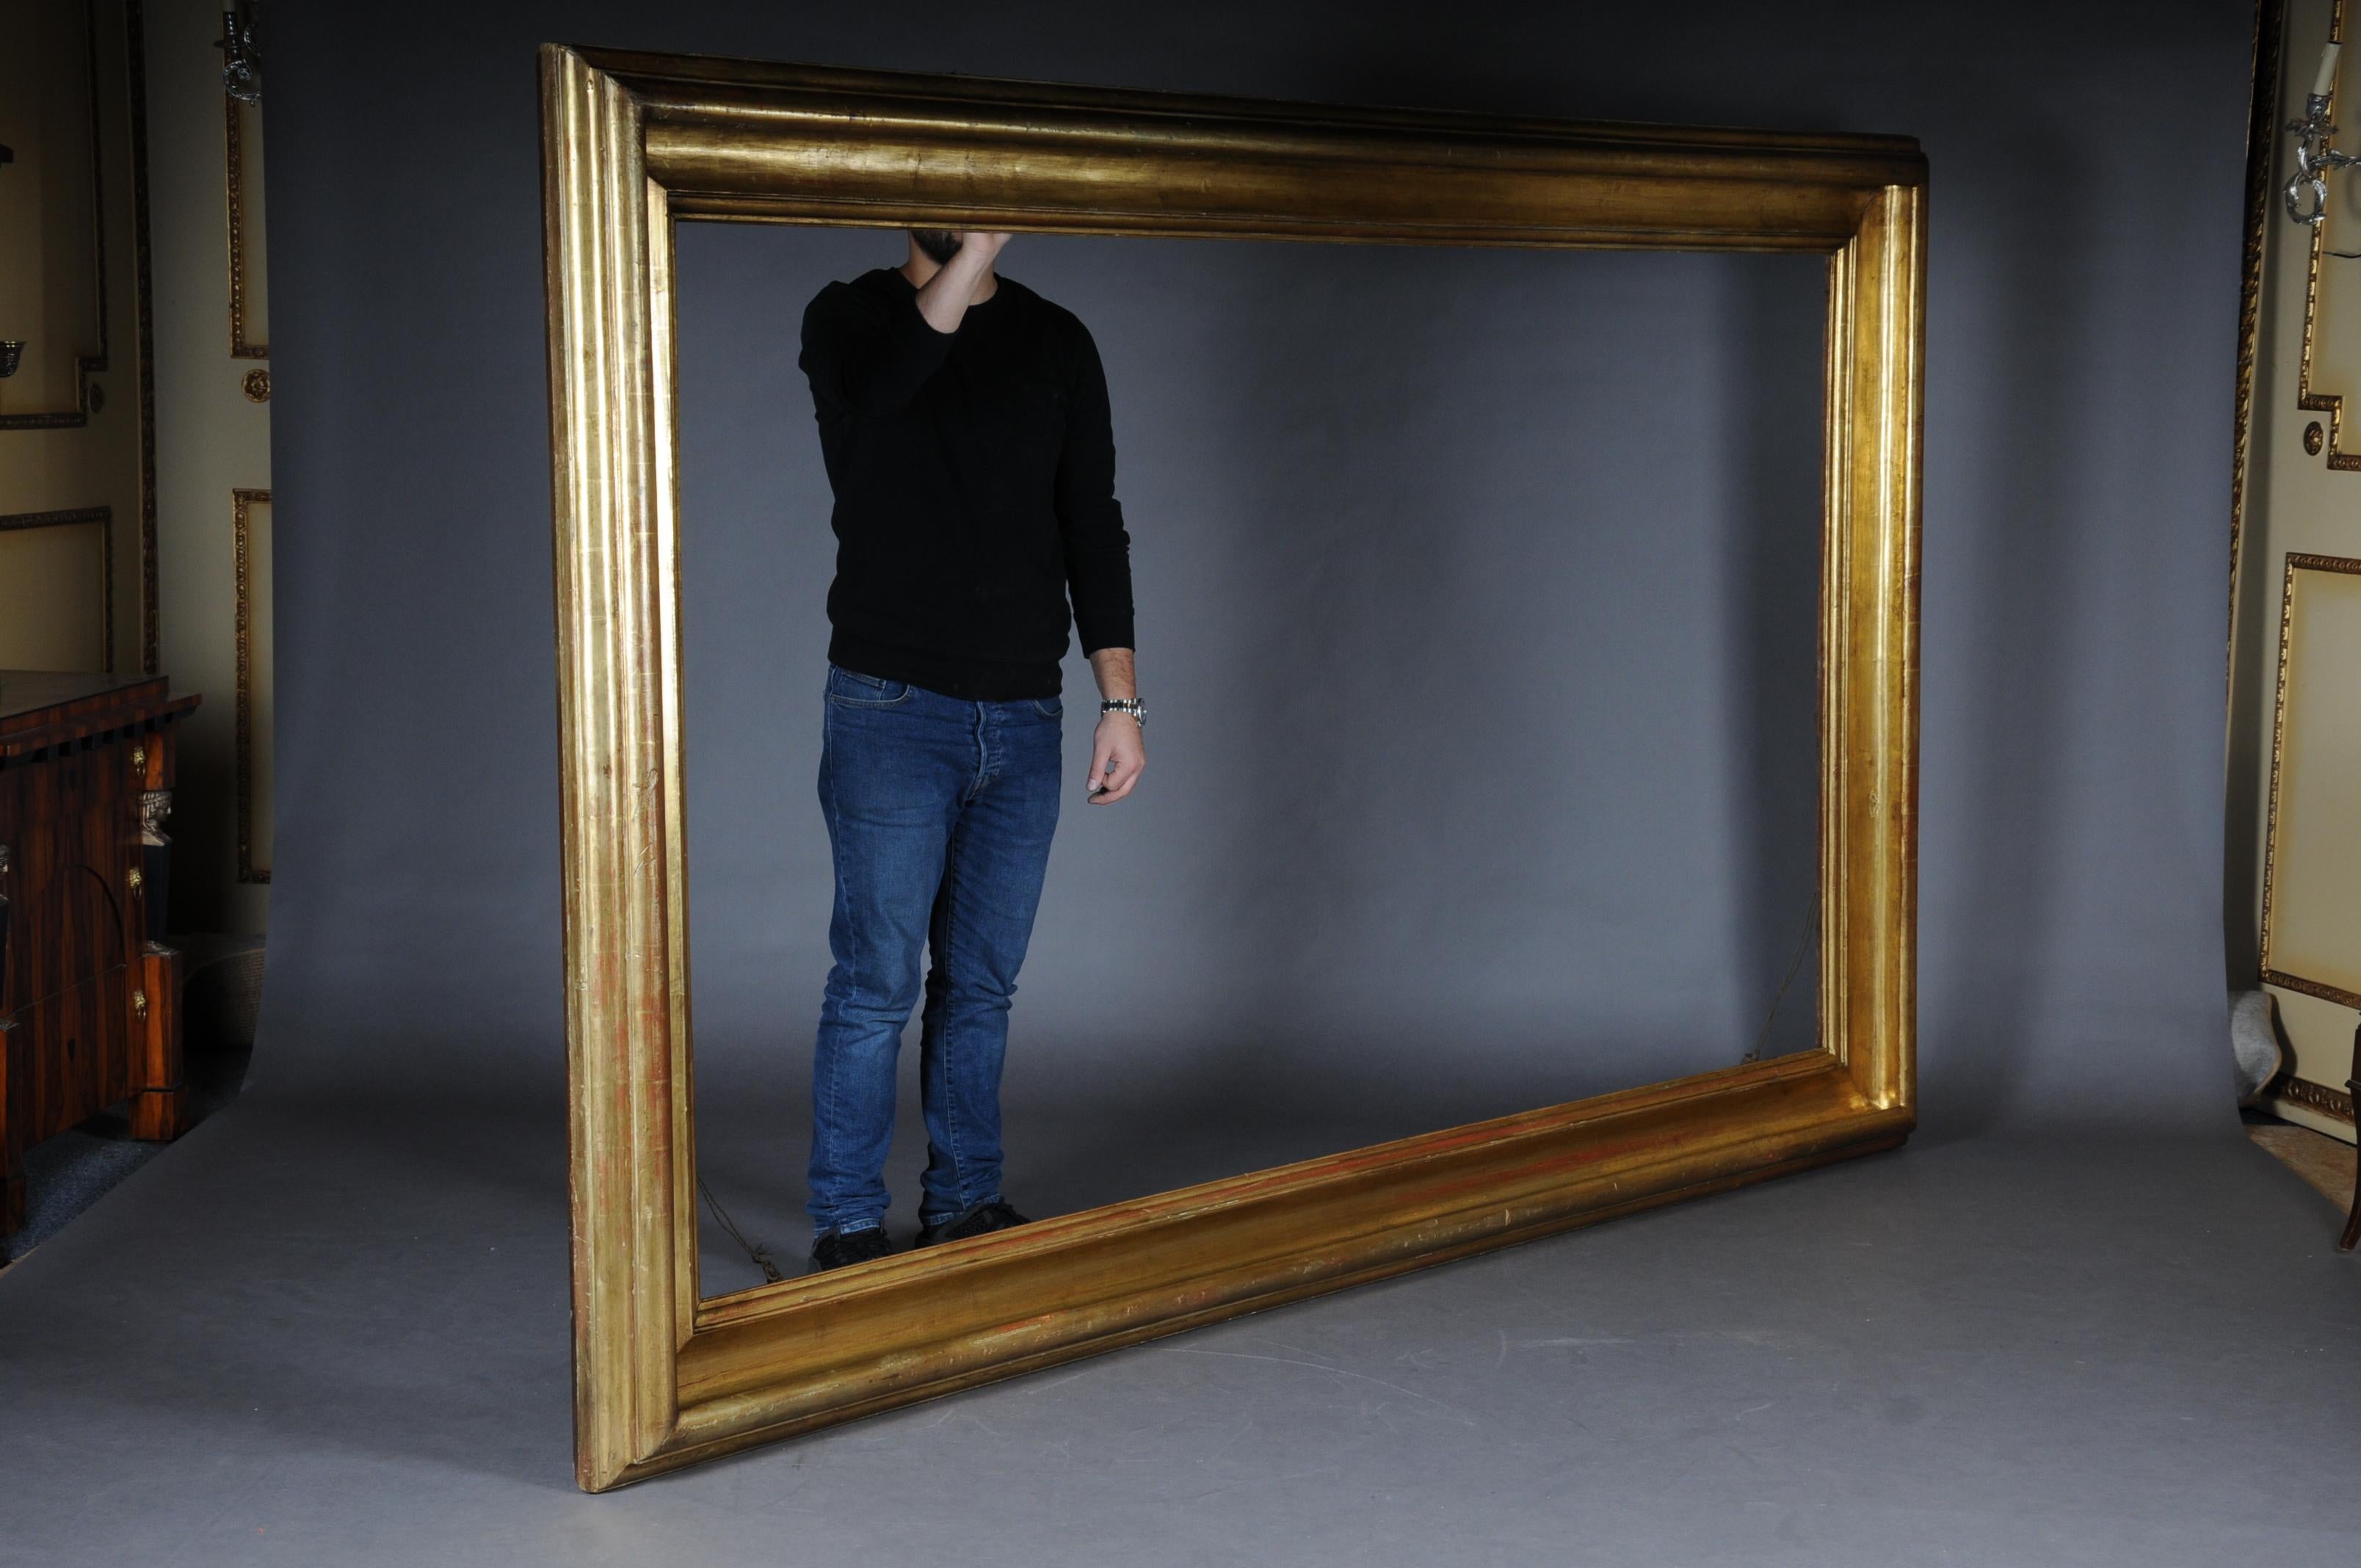 Monumental sheet gilded mirror frame / picture frame, circa 1850.

Multi-level profiled frame in solid wood and genuine gold leaf.
 
(M-40).